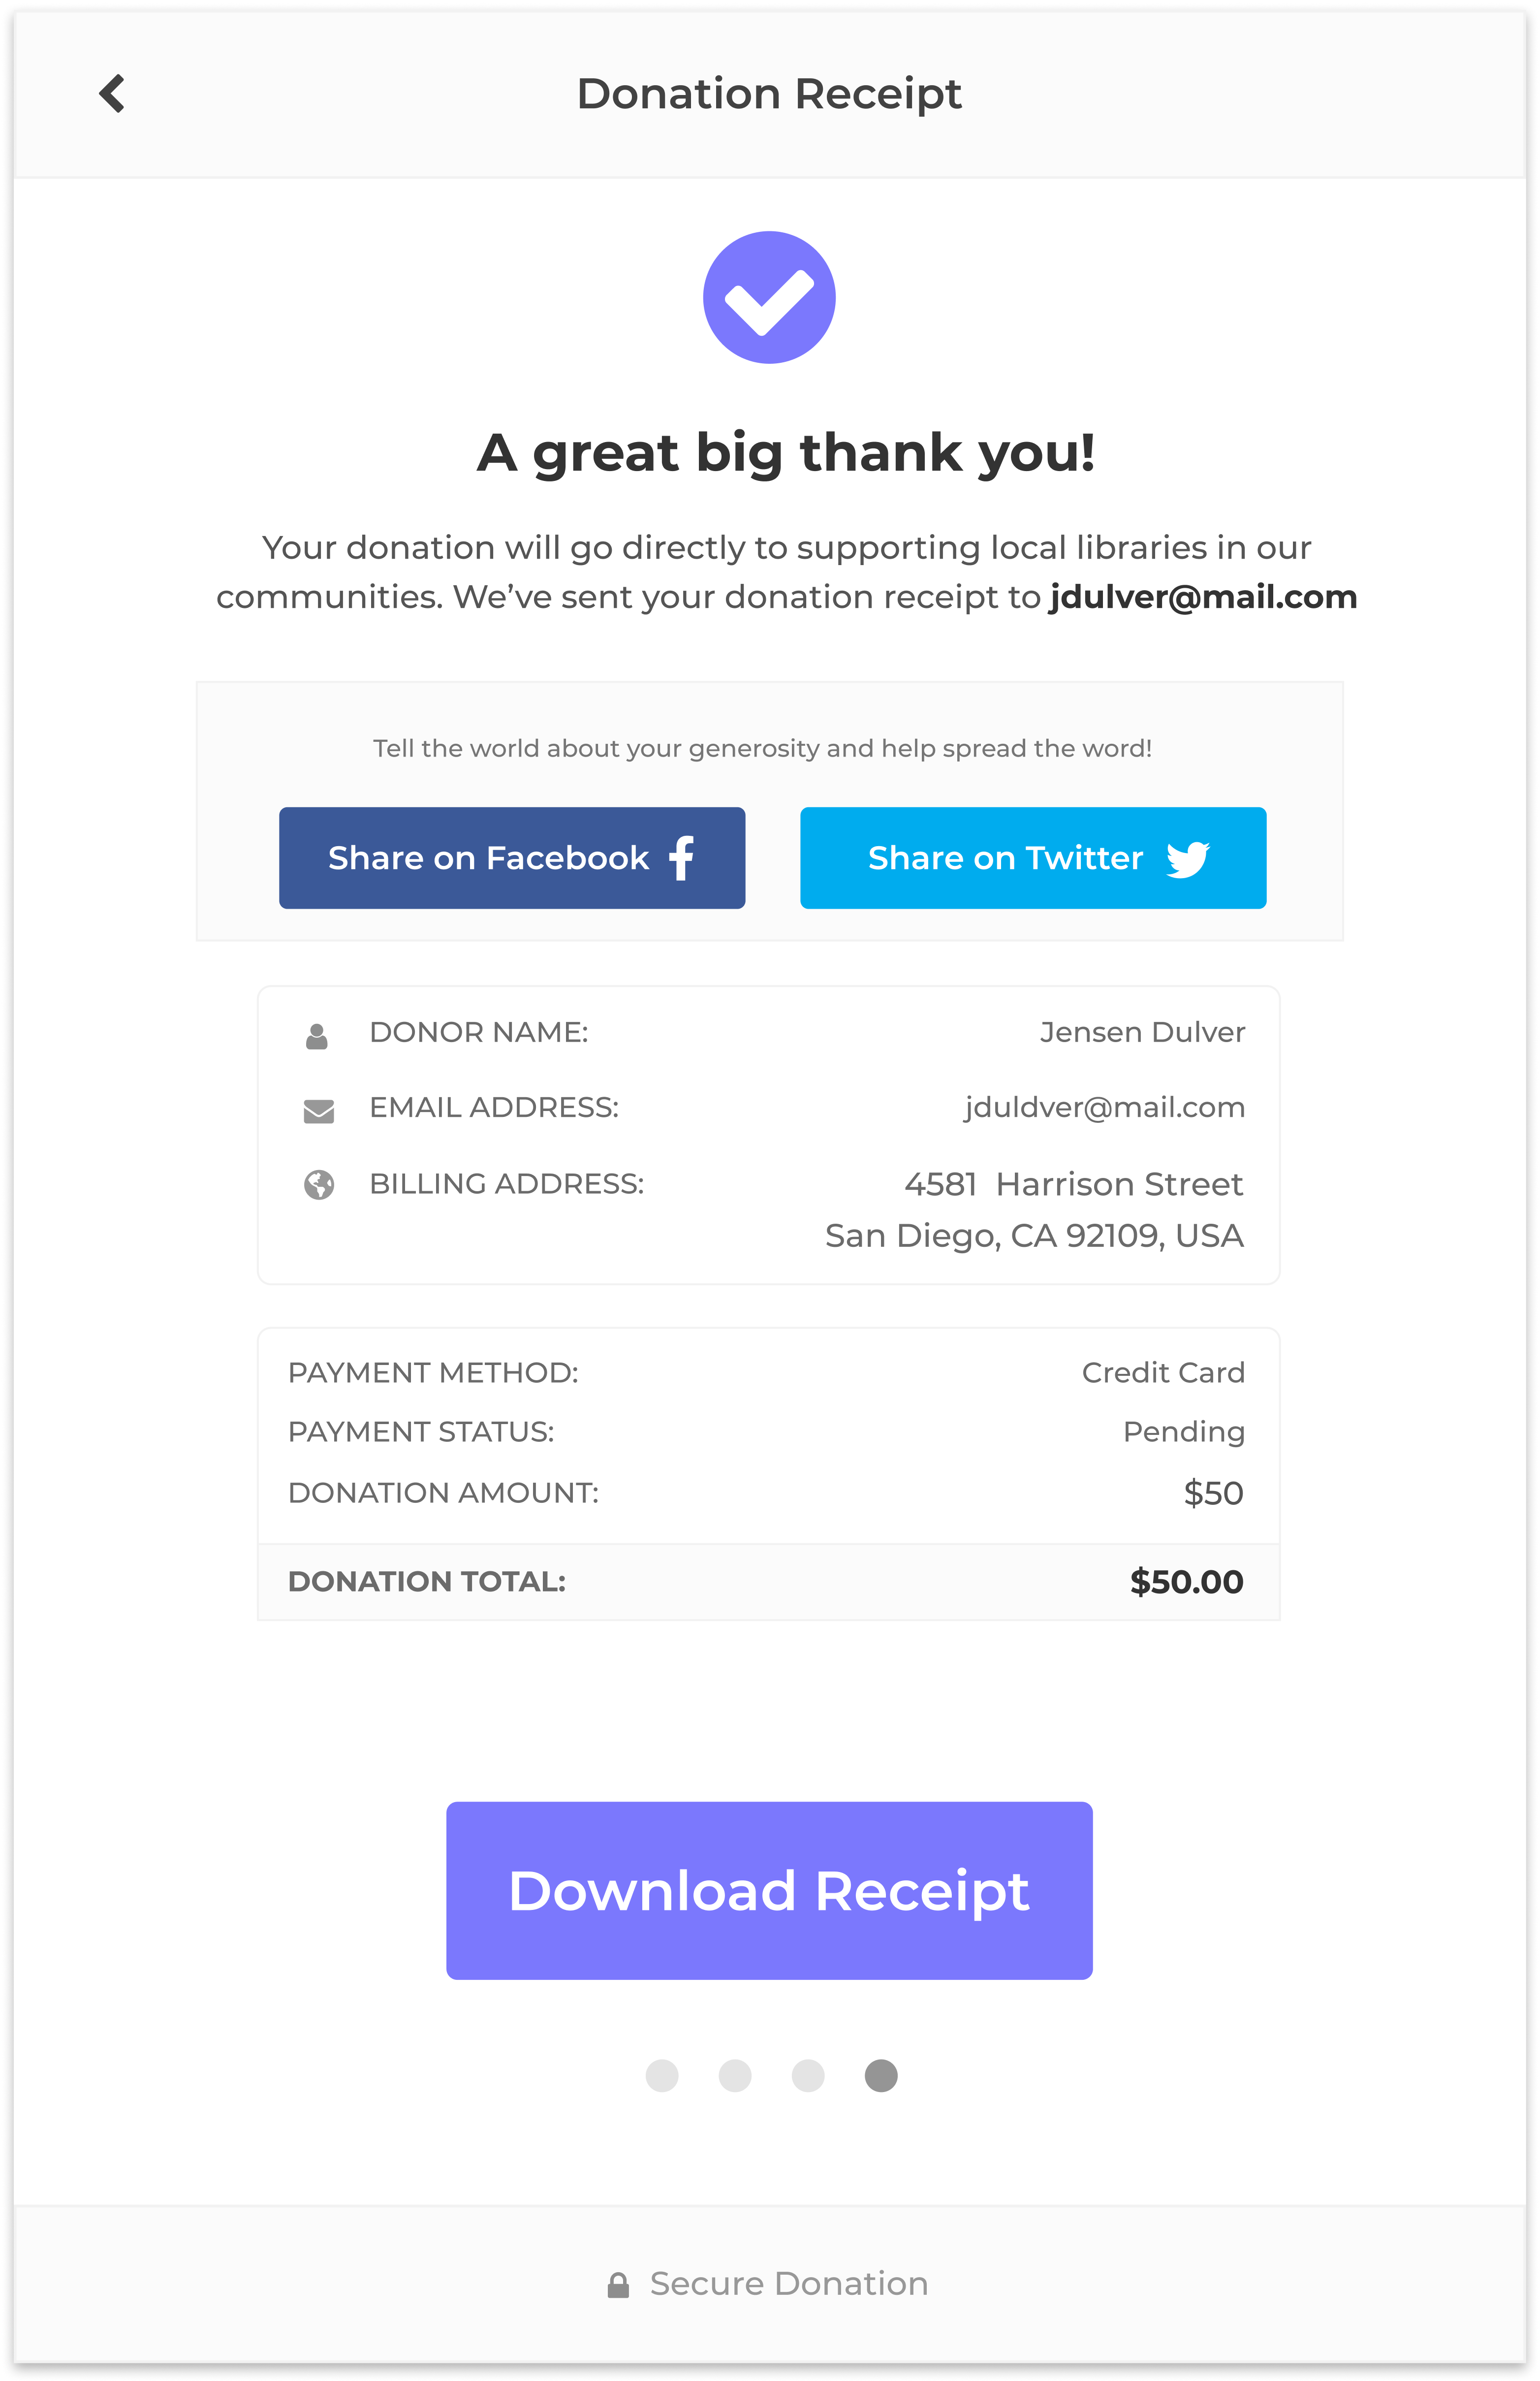 A sample donation receipt with facebook and twitter sharing buttons